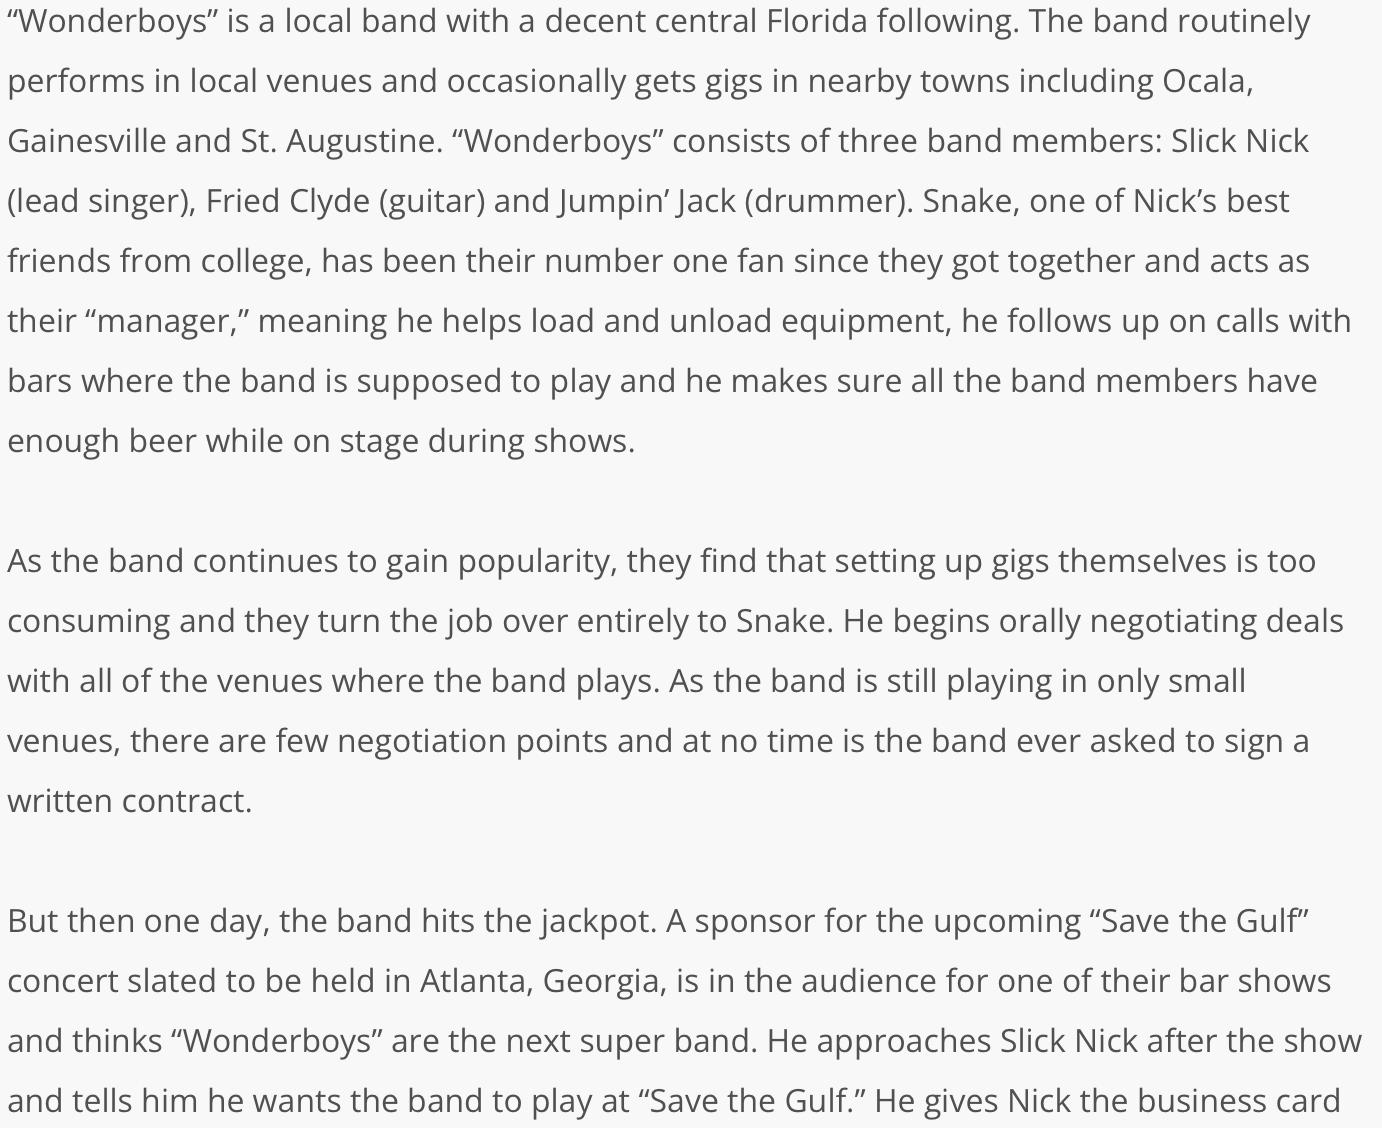 "Wonderboys" is a local band with a decent central Florida following. The band routinely performs in local